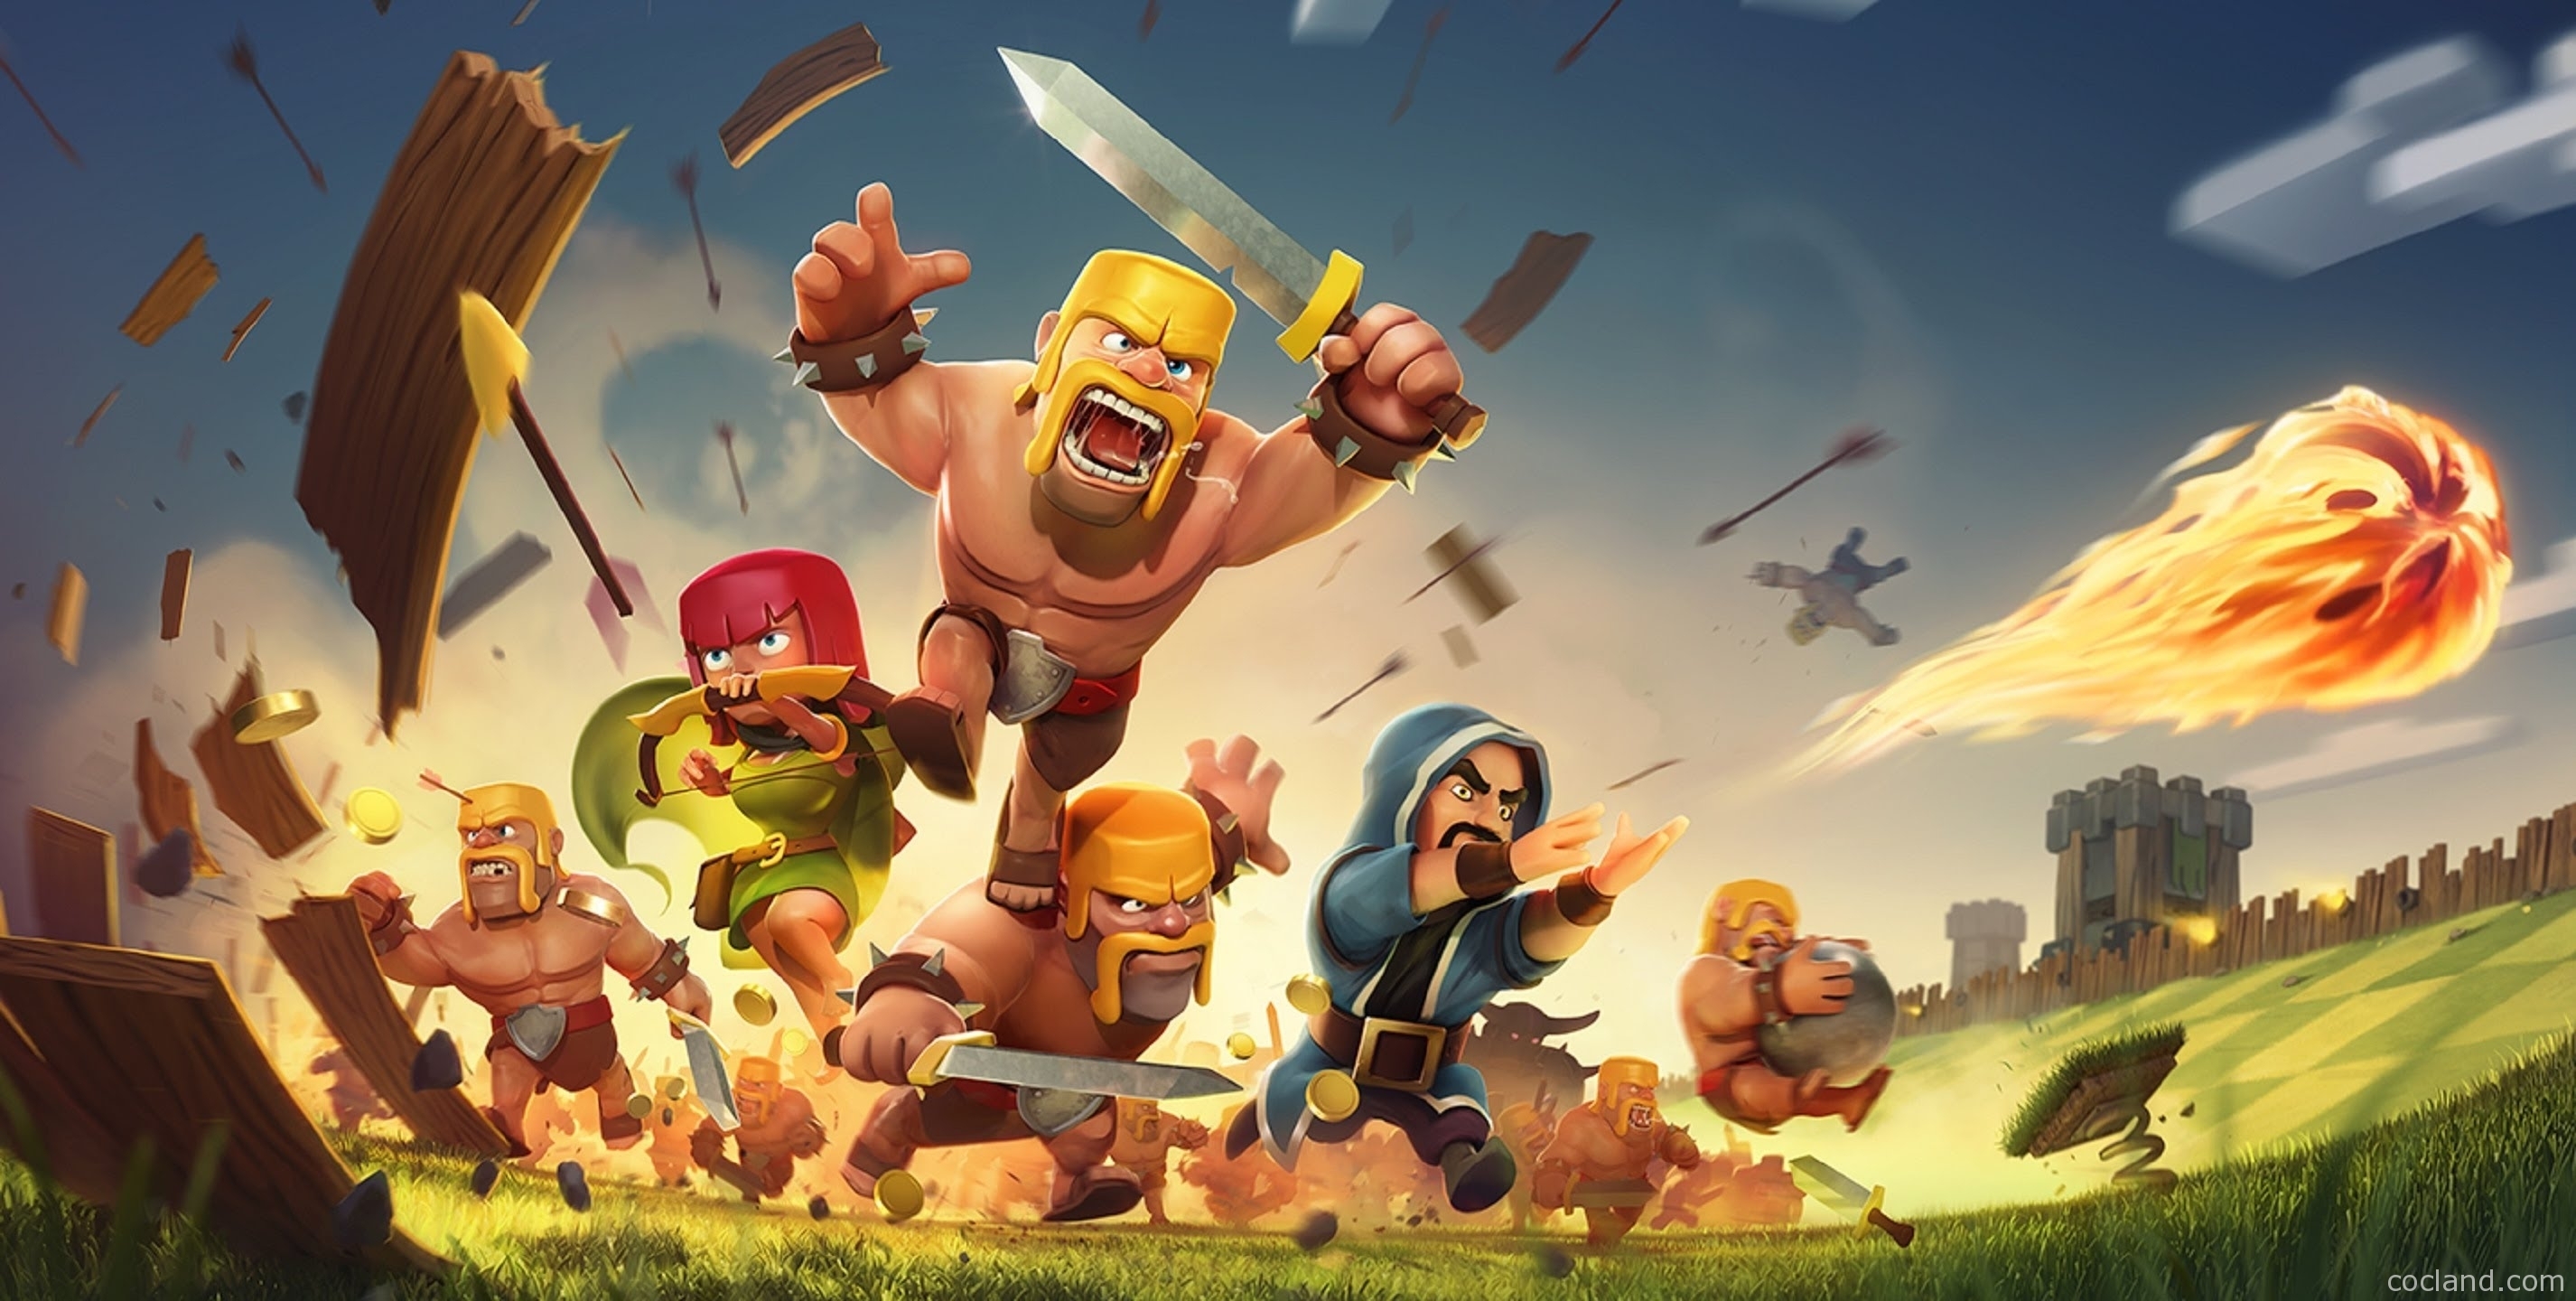 100% quality hd clash of clans wallpapers archives (46) - b.scb